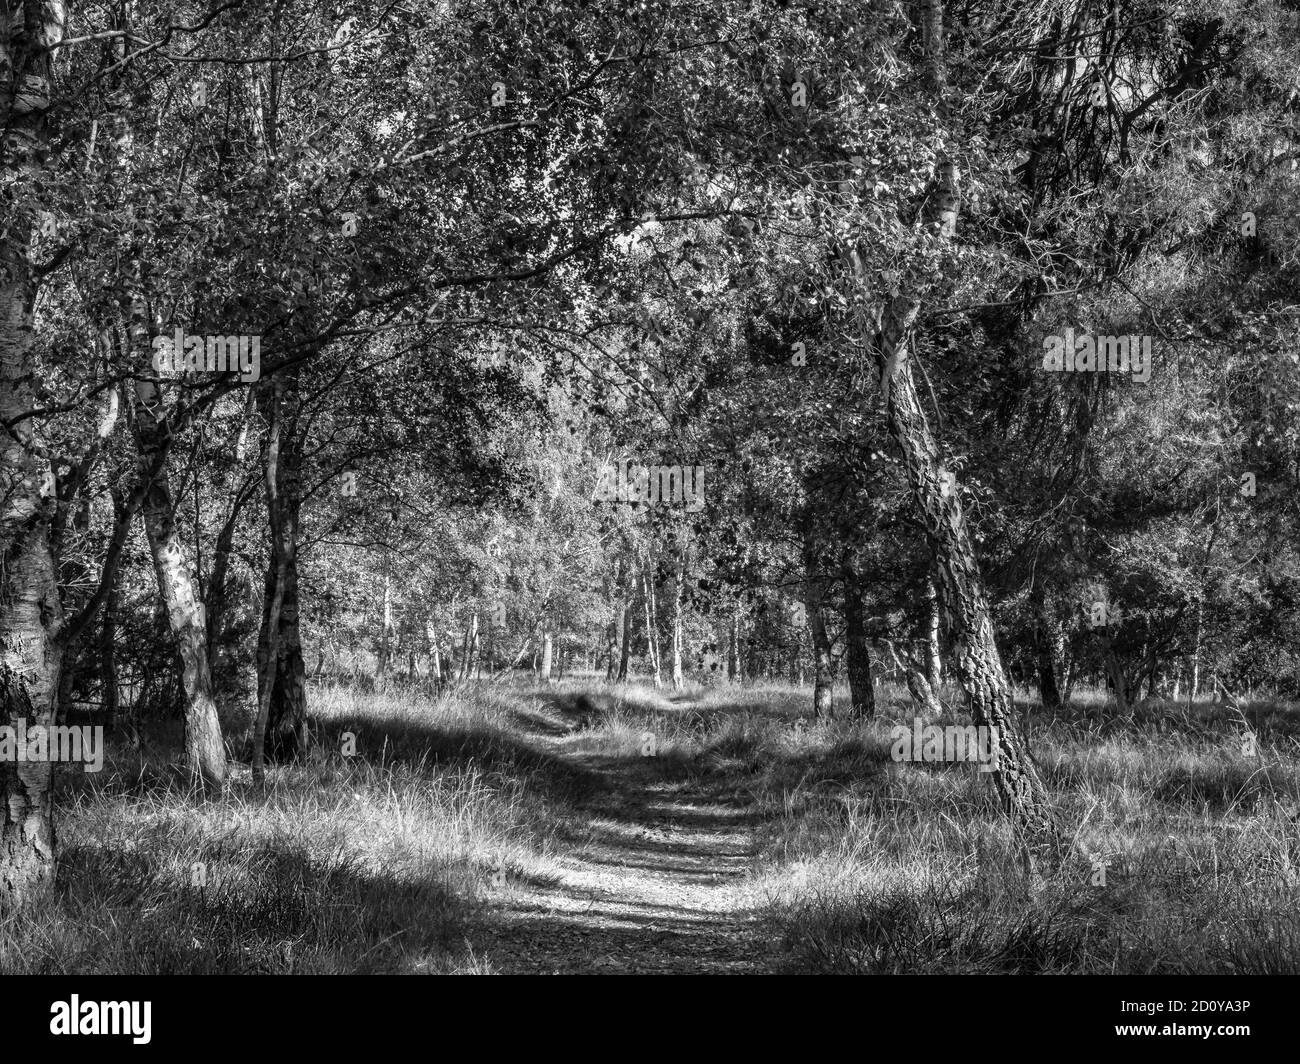 Birch trees in a woodland. The sunshine throws dappled light and long shadows onto the ground as a path meanders through the trees. Stock Photo